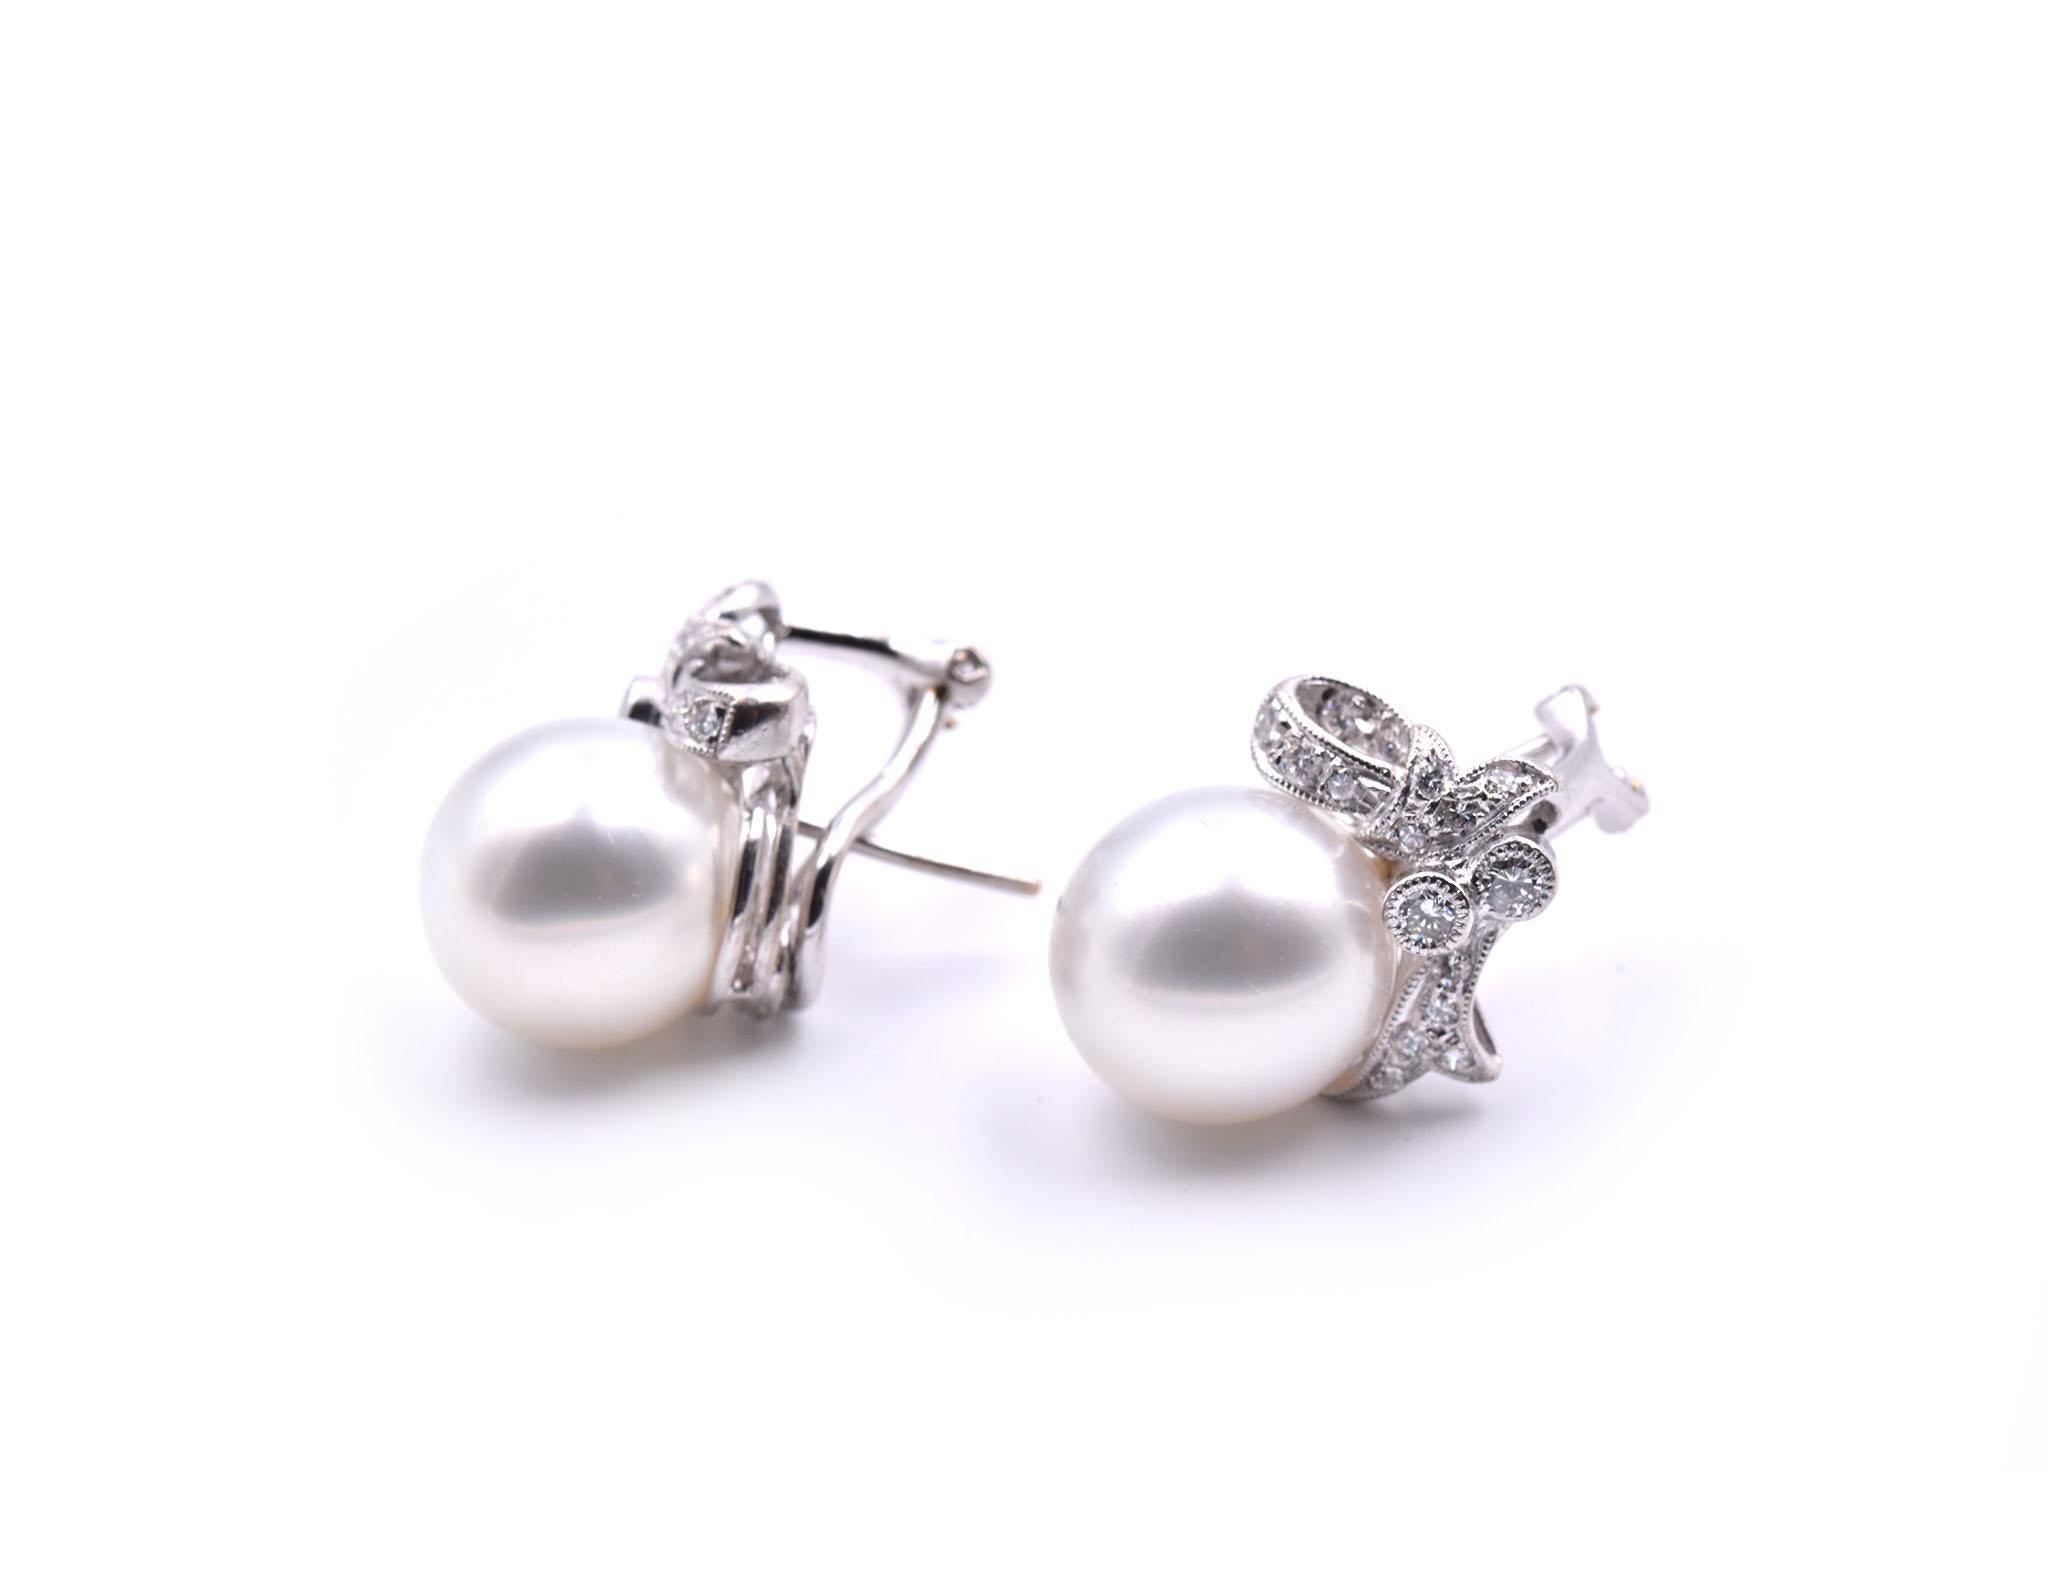 Round Cut 18 Karat White Gold South Sea Pearls and Diamond Earrings